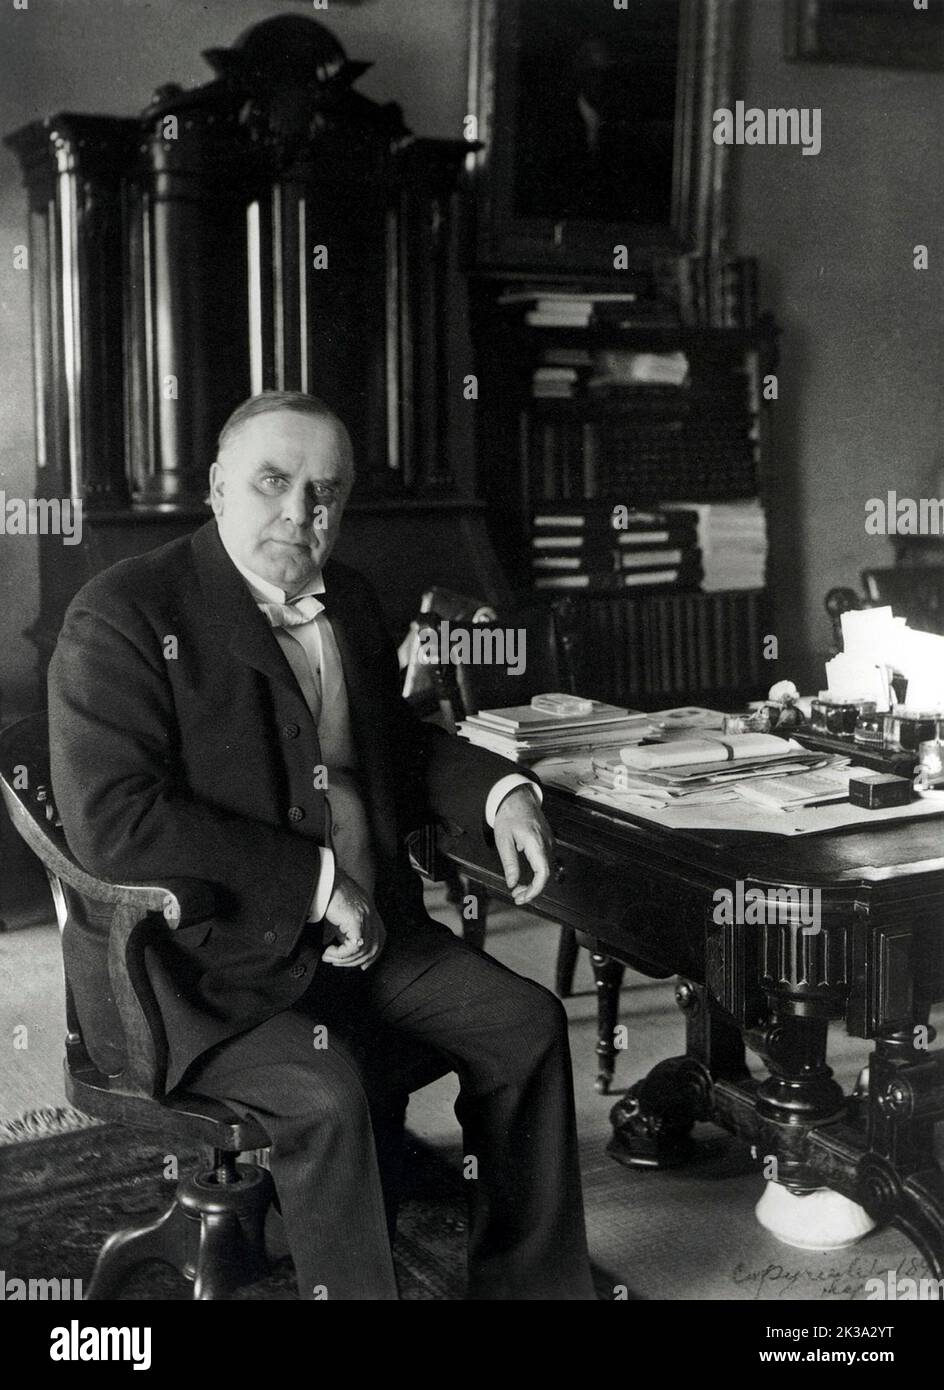 A portrait of US President William McKinley at his desk in the Treaty Room of the White House. McKinley was the 25th president of the USA, and the third of four to be assassinated. He was shot by Leon Czolgosz on 6th September 1901. Like James Garfield, McKinley briefly recovered from the wounds, to die of sepsis some time later. In this engraving he is seen as a presidential candidate. Stock Photo